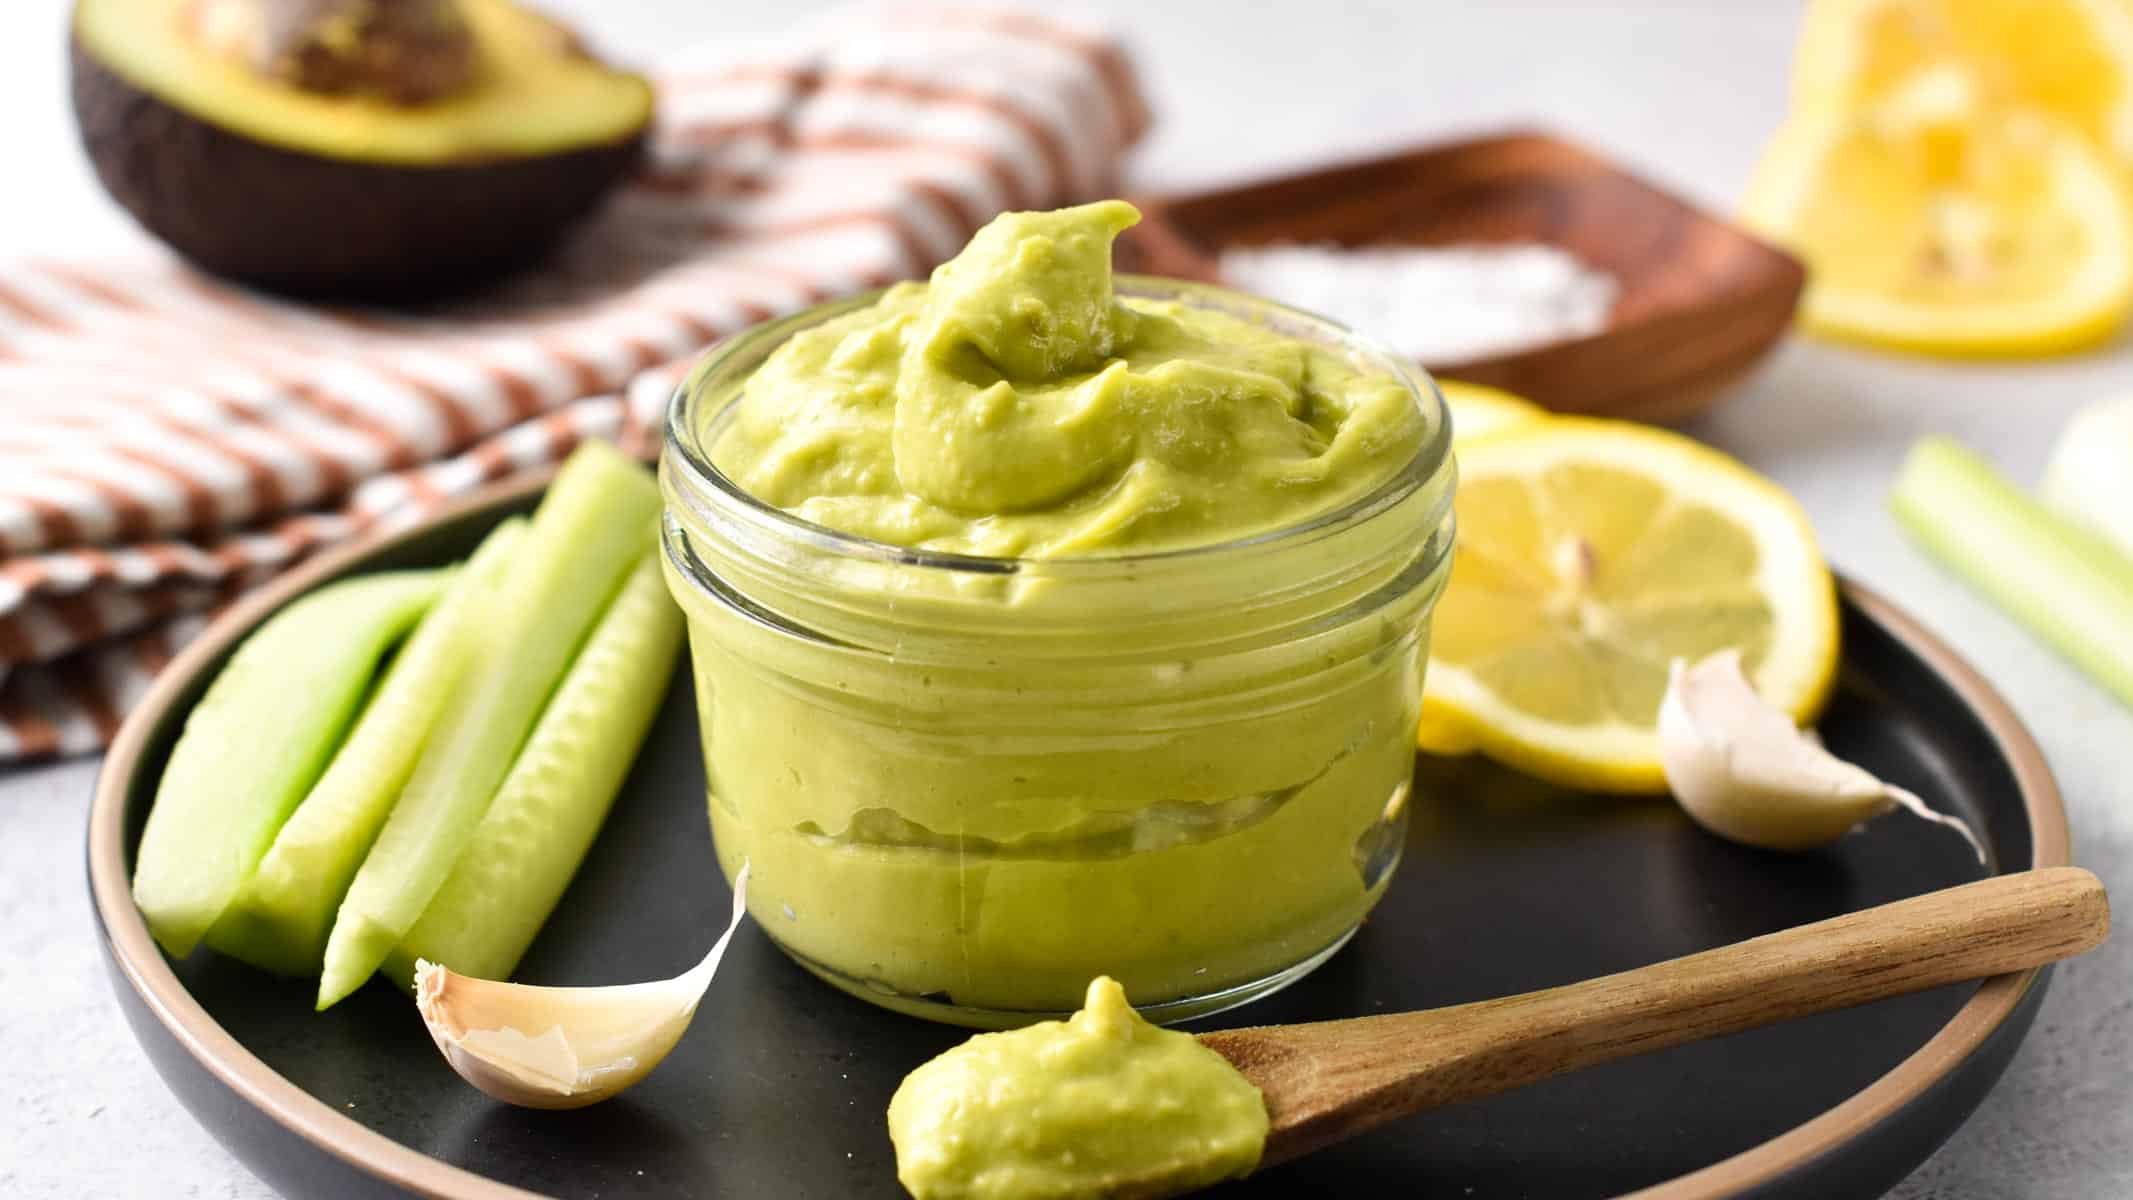 This Avocado Mayonnaise is an healthy creamy mayonnaise made from avocado instead of eggs. It's an egg-free mayo with healthy fats from avocado and avocado oil perfect to spread on sandwiches